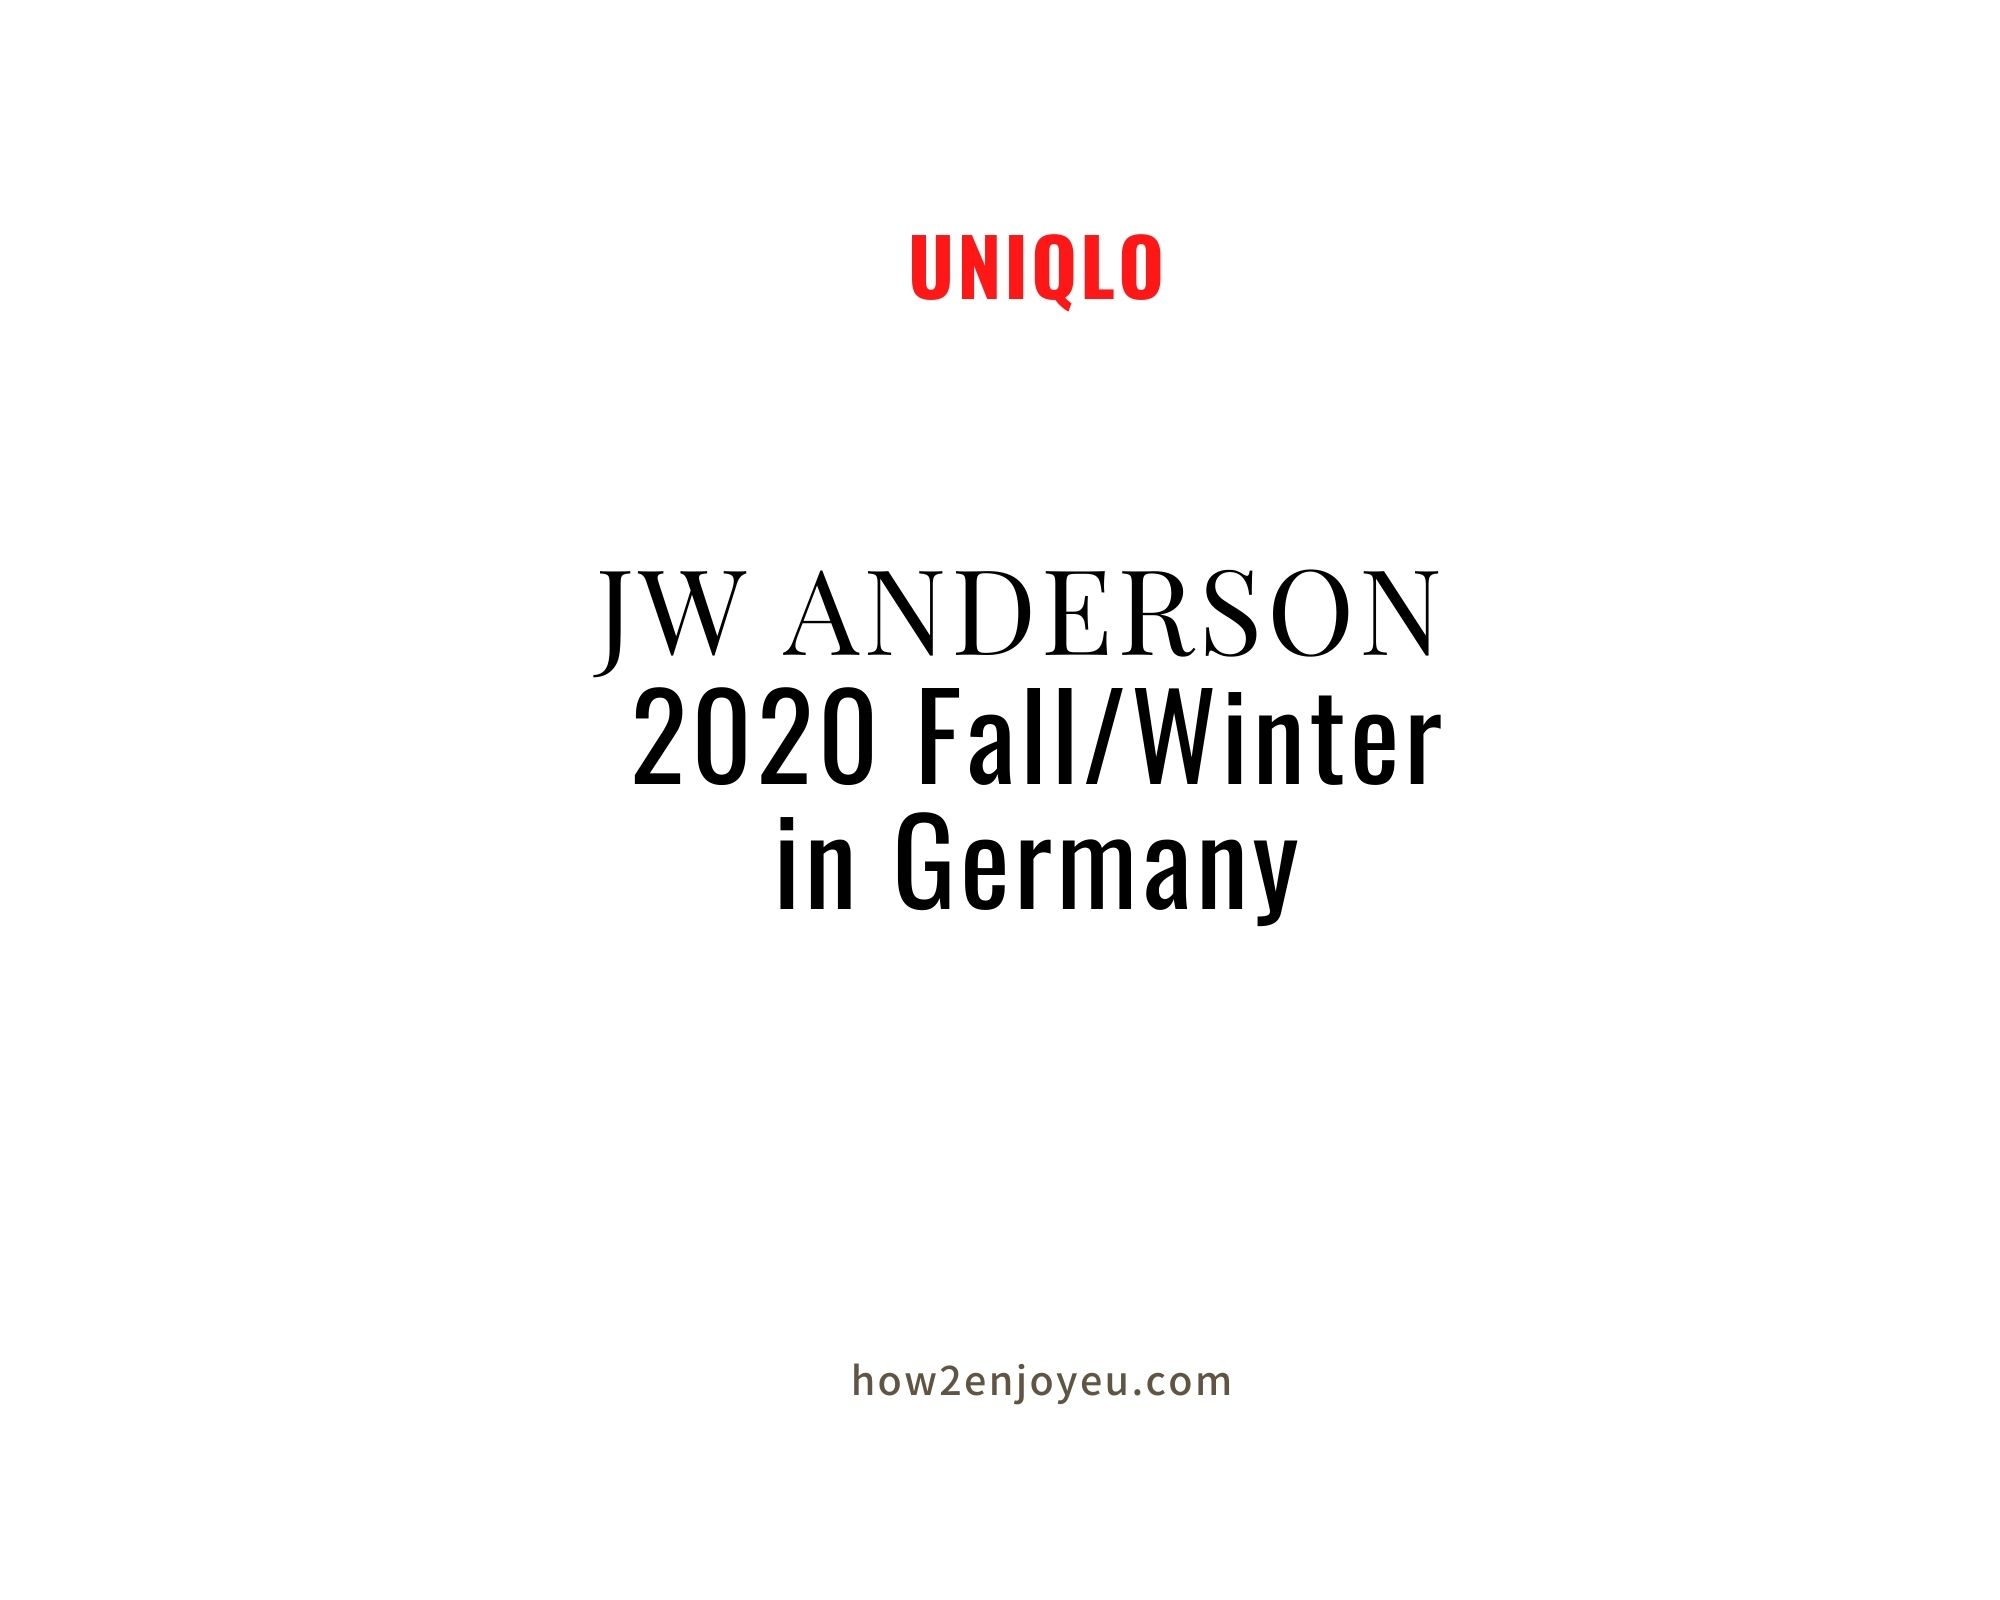 You are currently viewing 2020年JW ANDERSONの秋冬物、ドイツではこれがすでに完売っぽい